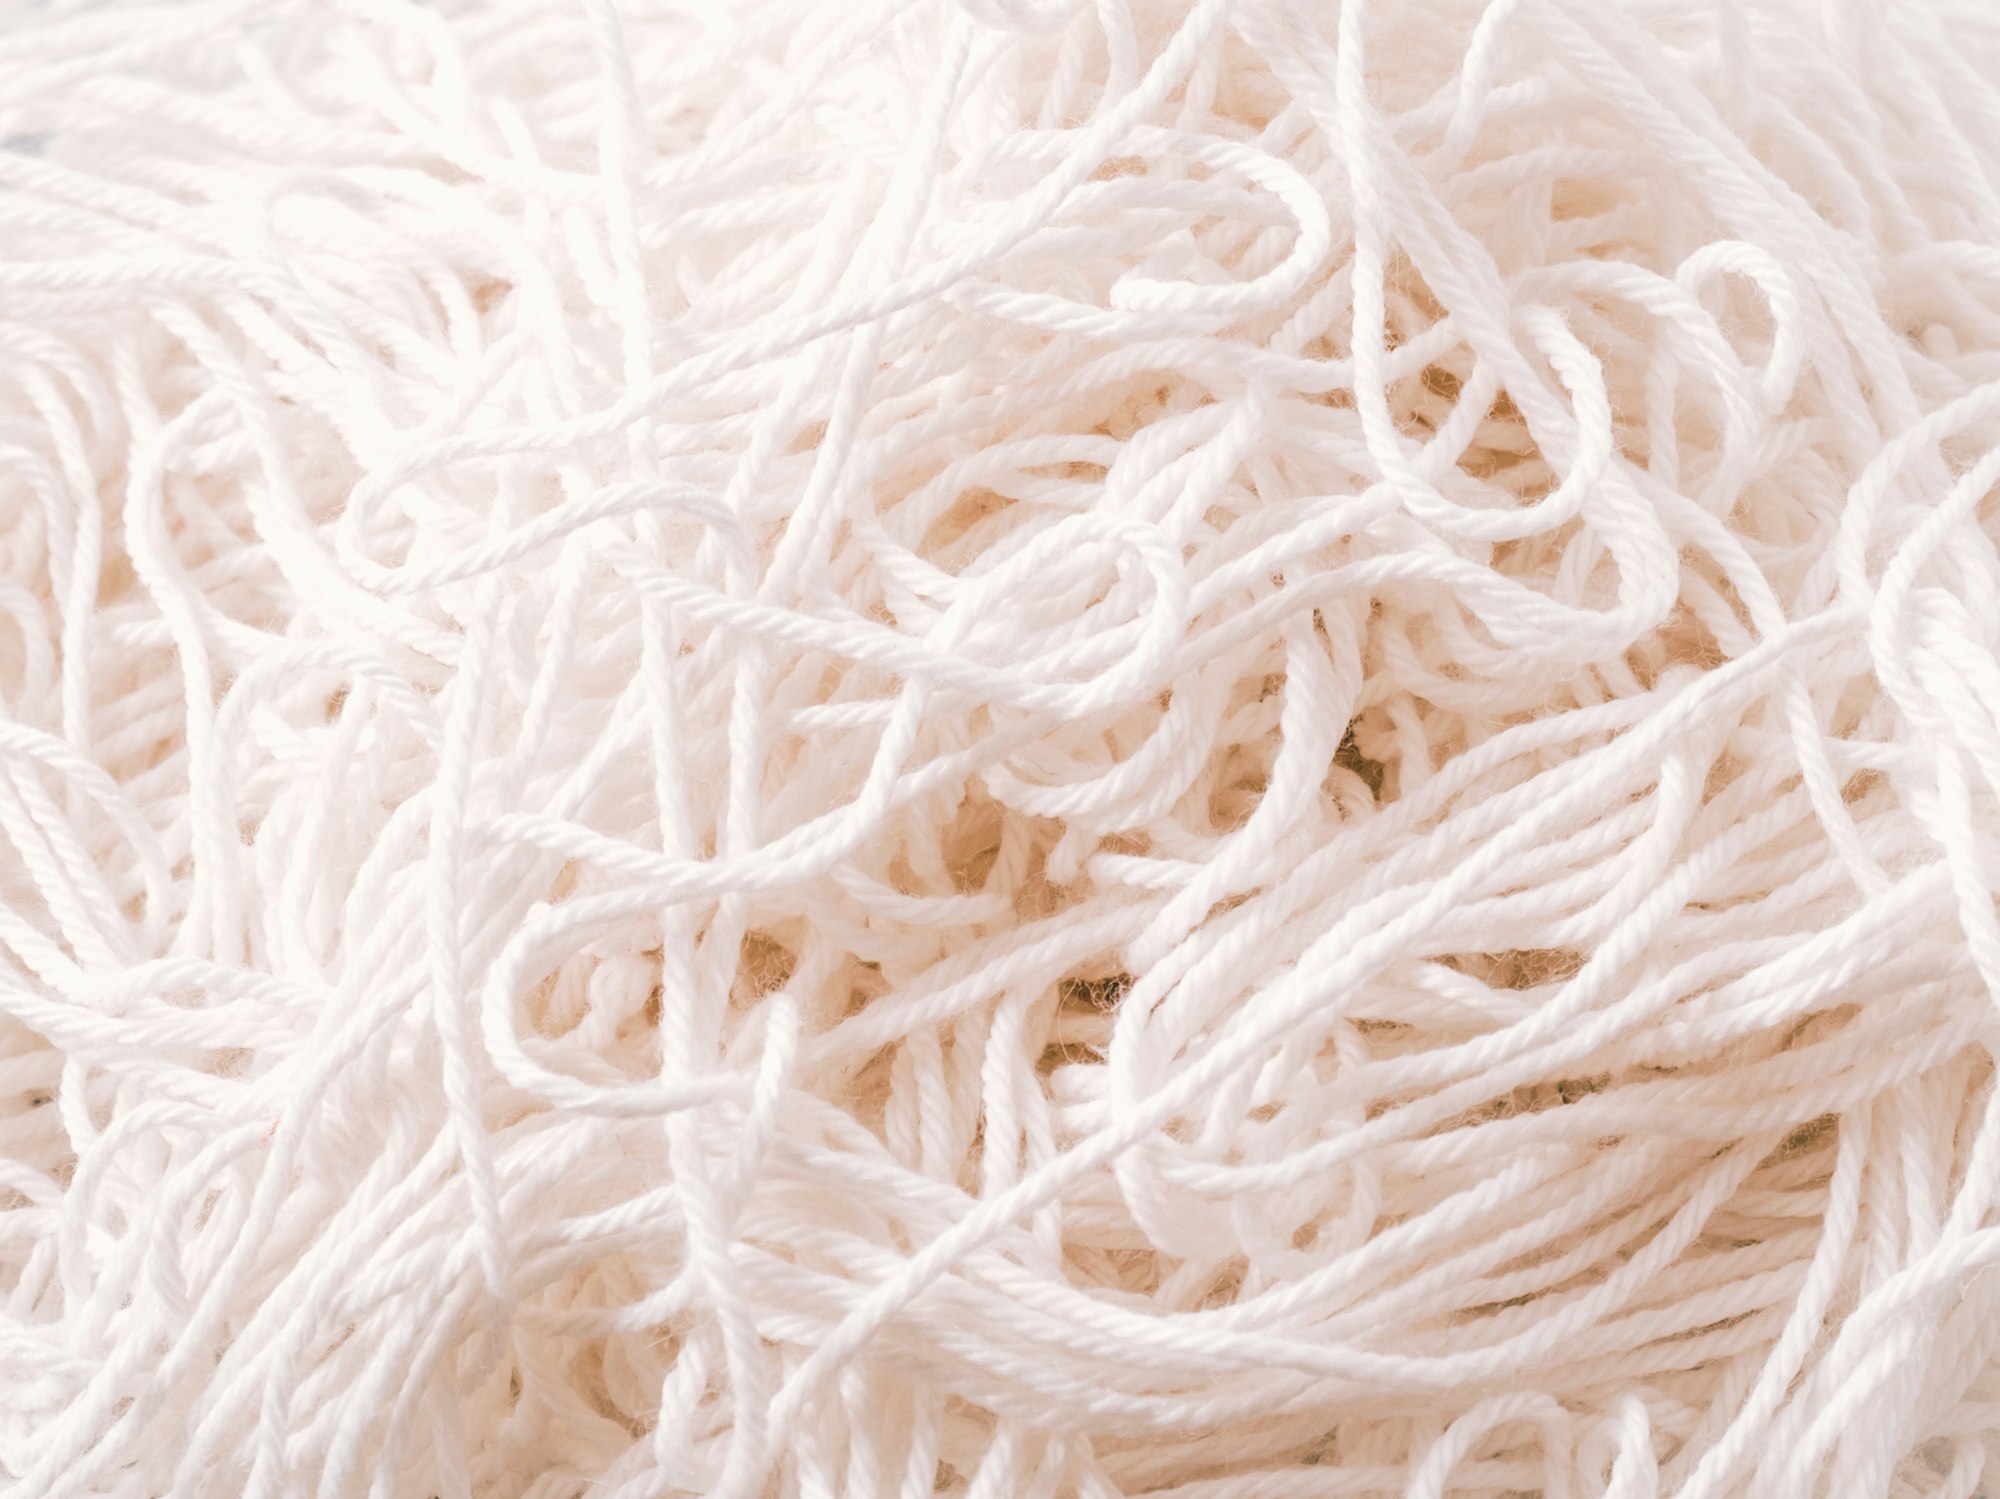 Abstract view of tangled white yarn.